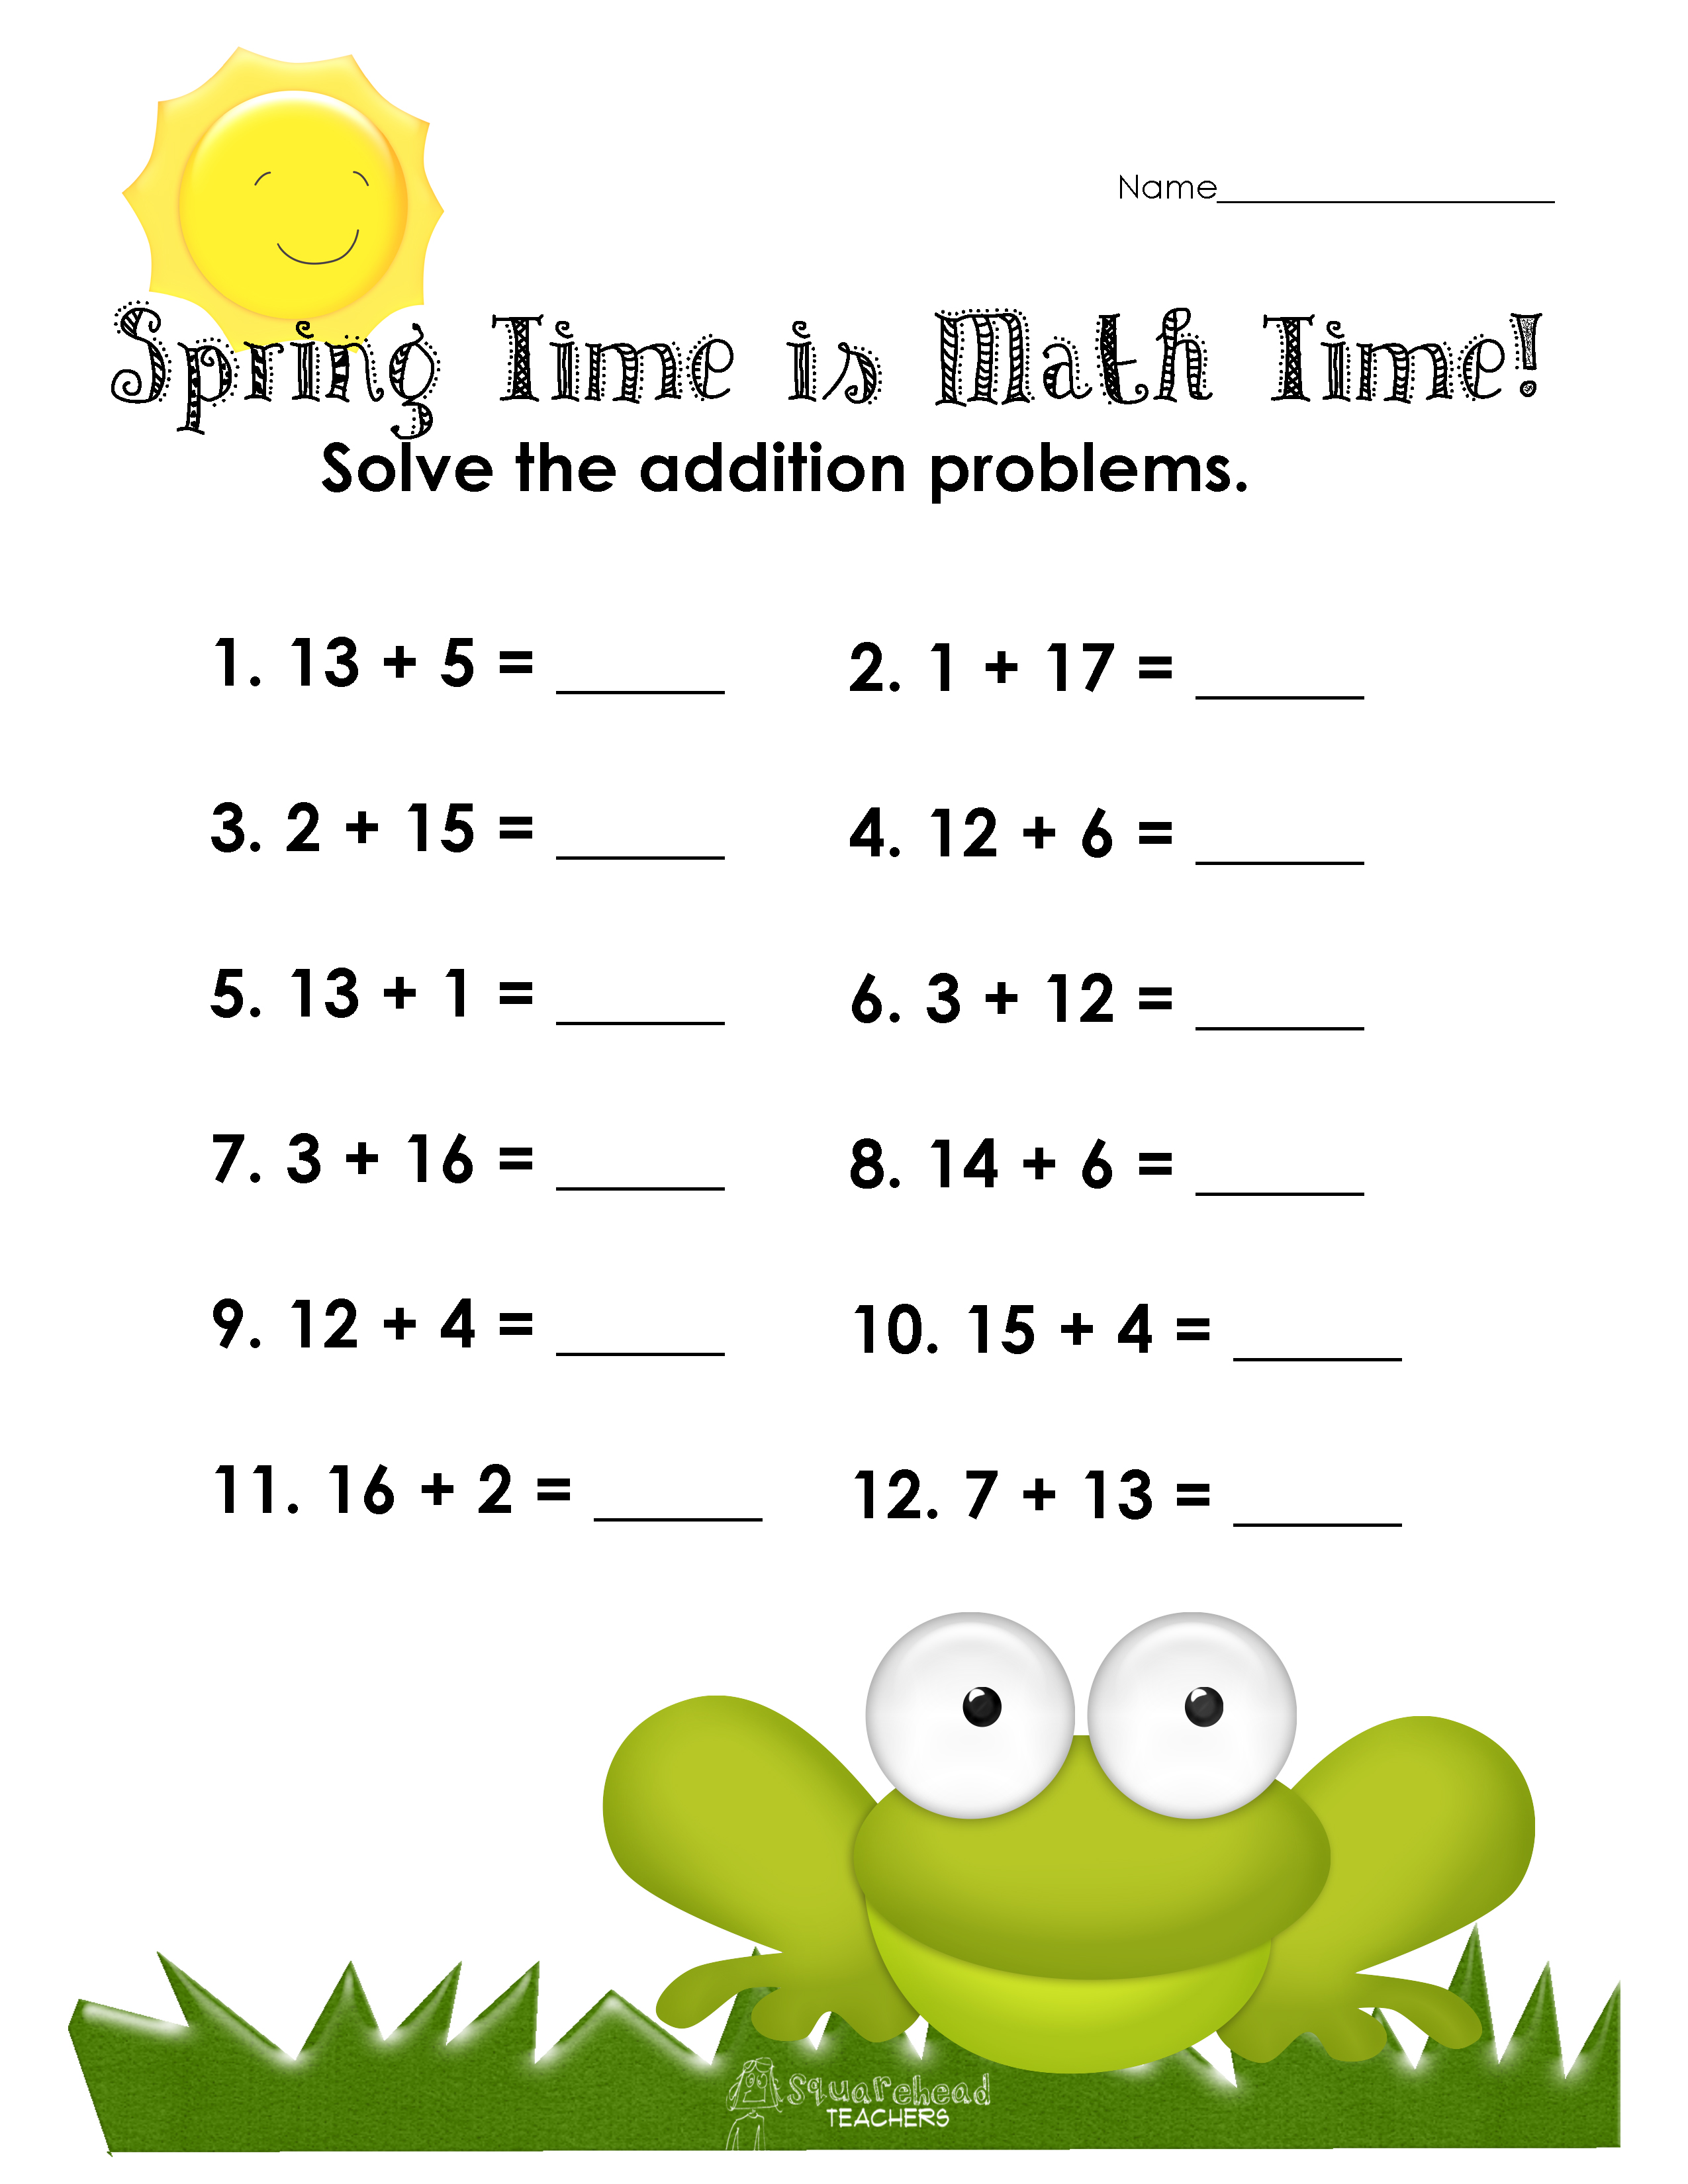 spring-time-means-math-time-free-addition-worksheet-squarehead-teachers